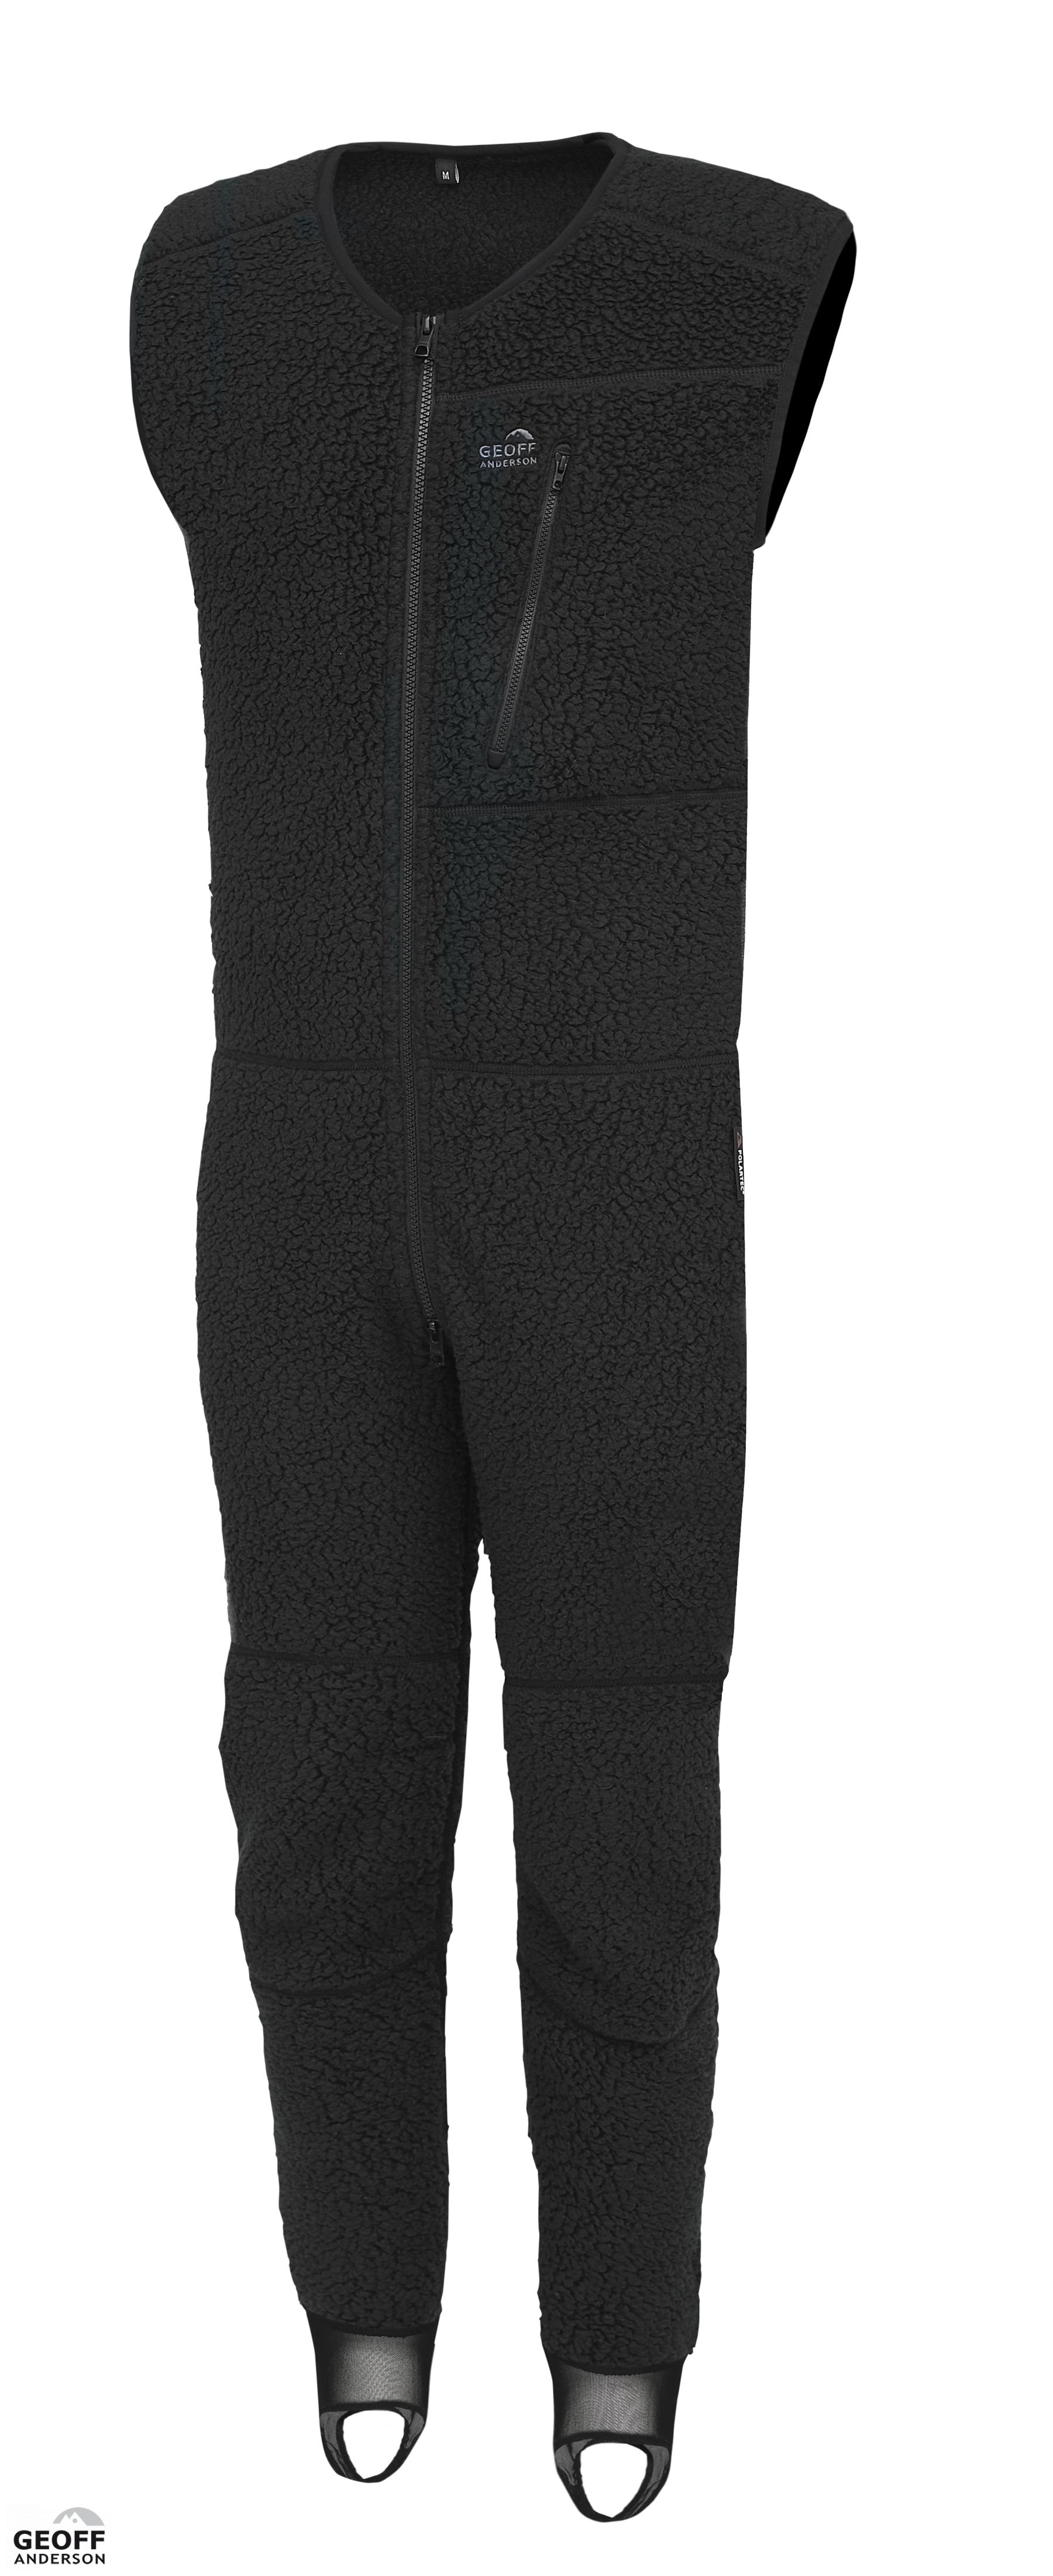 Geoff Anderson Thermal 300 Overall M